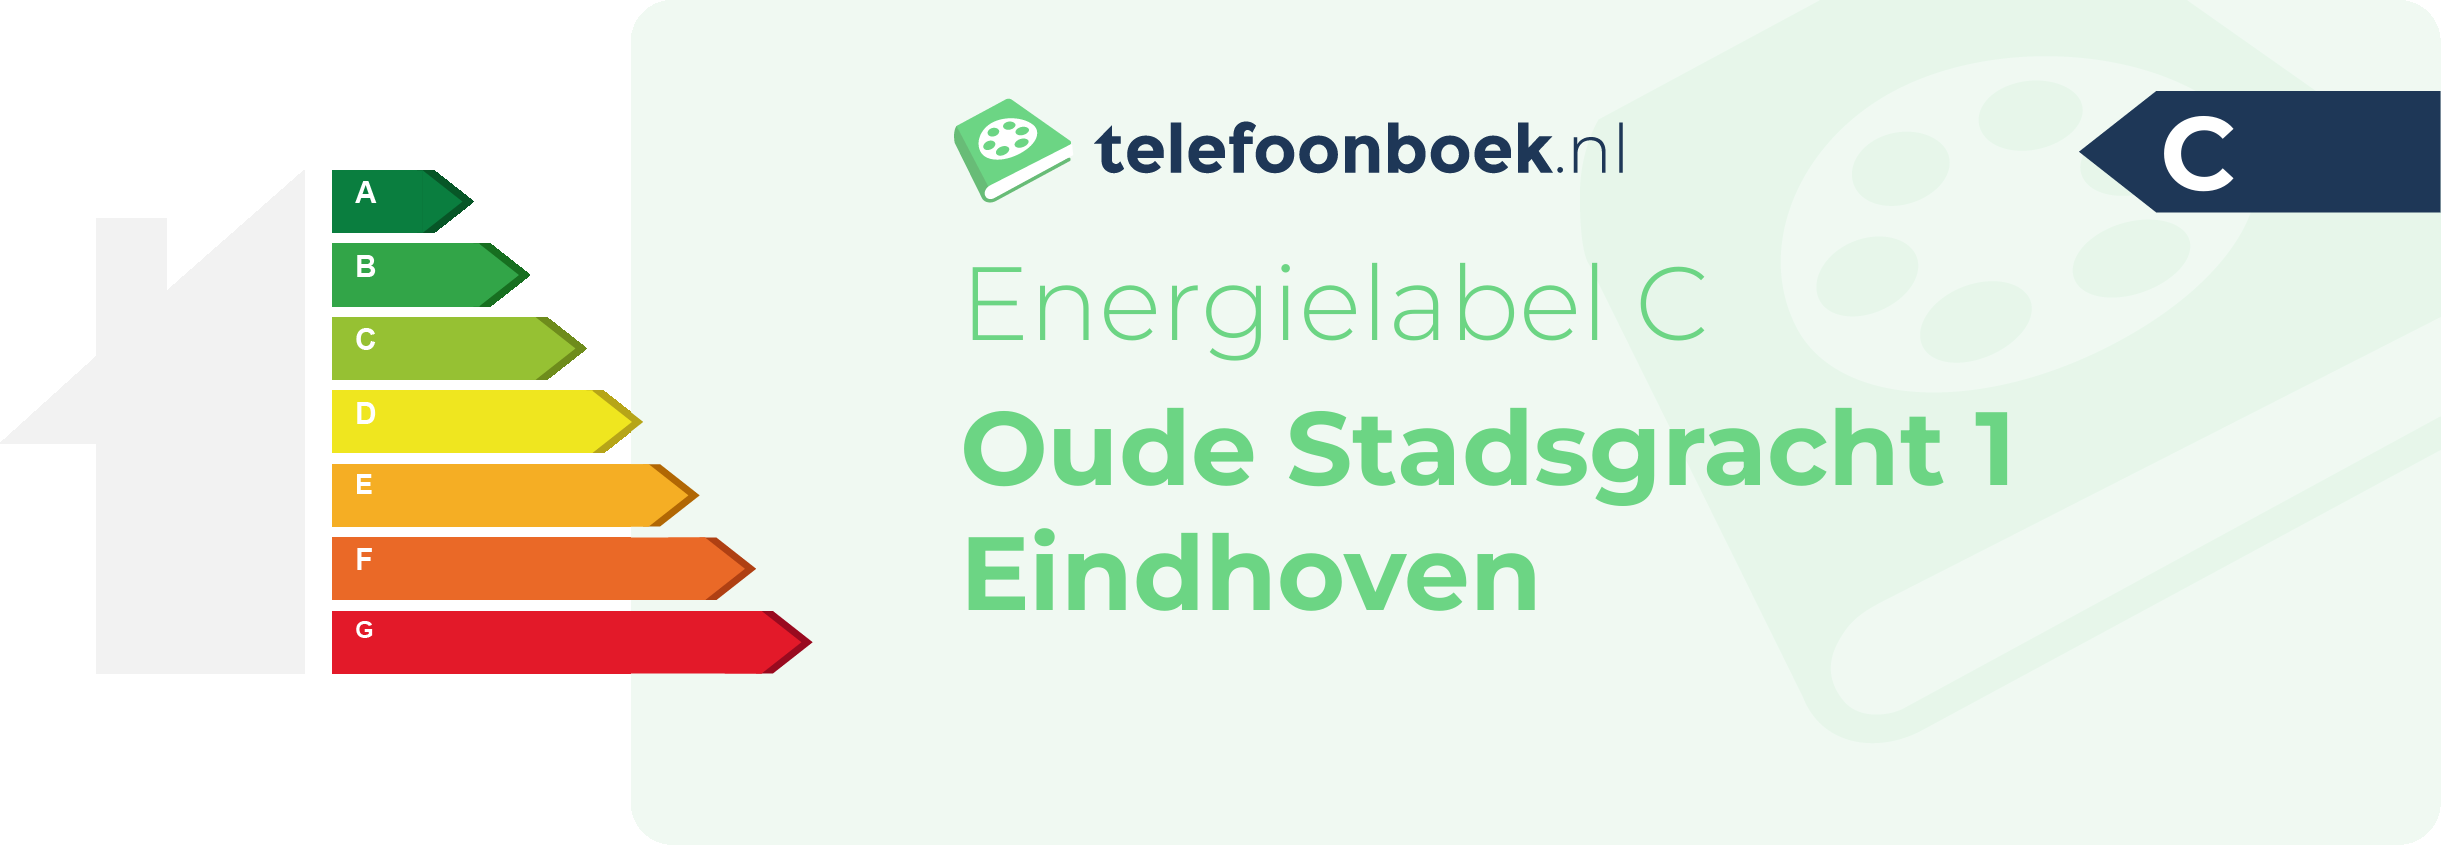 Energielabel Oude Stadsgracht 1 Eindhoven